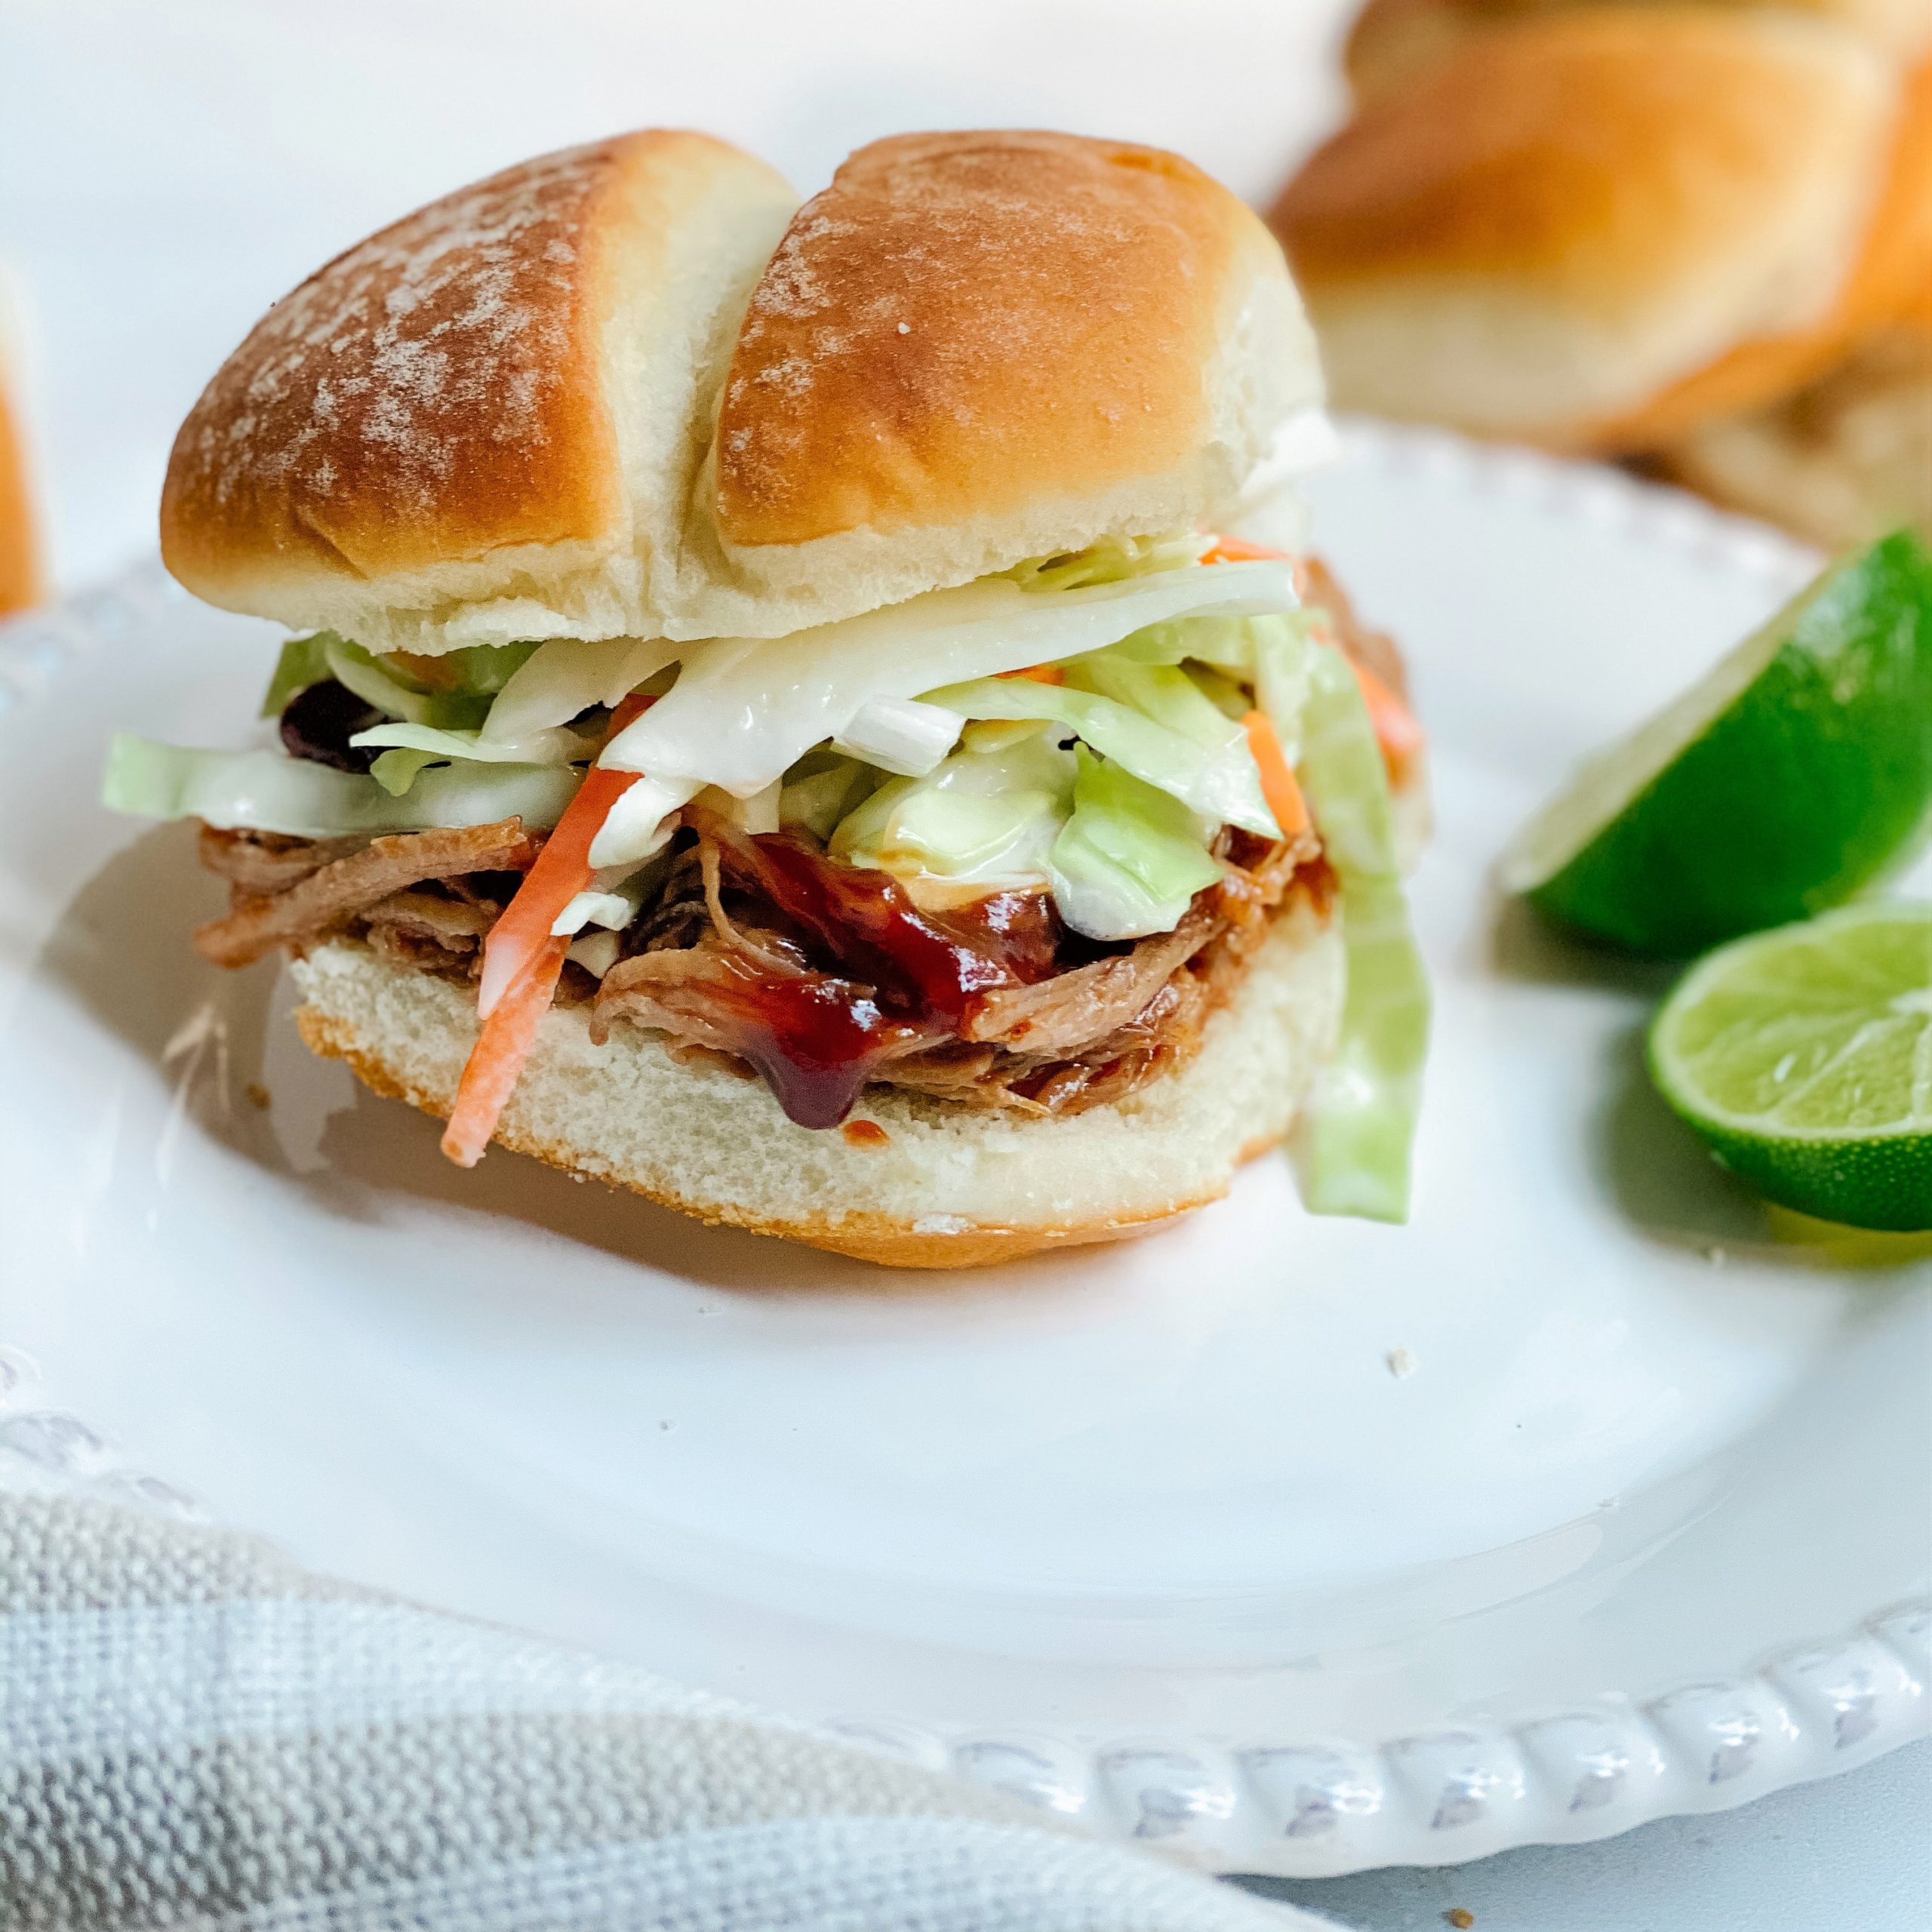 BBQ Pulled Pork Sandwiches Recipe - Sweet & Tangy